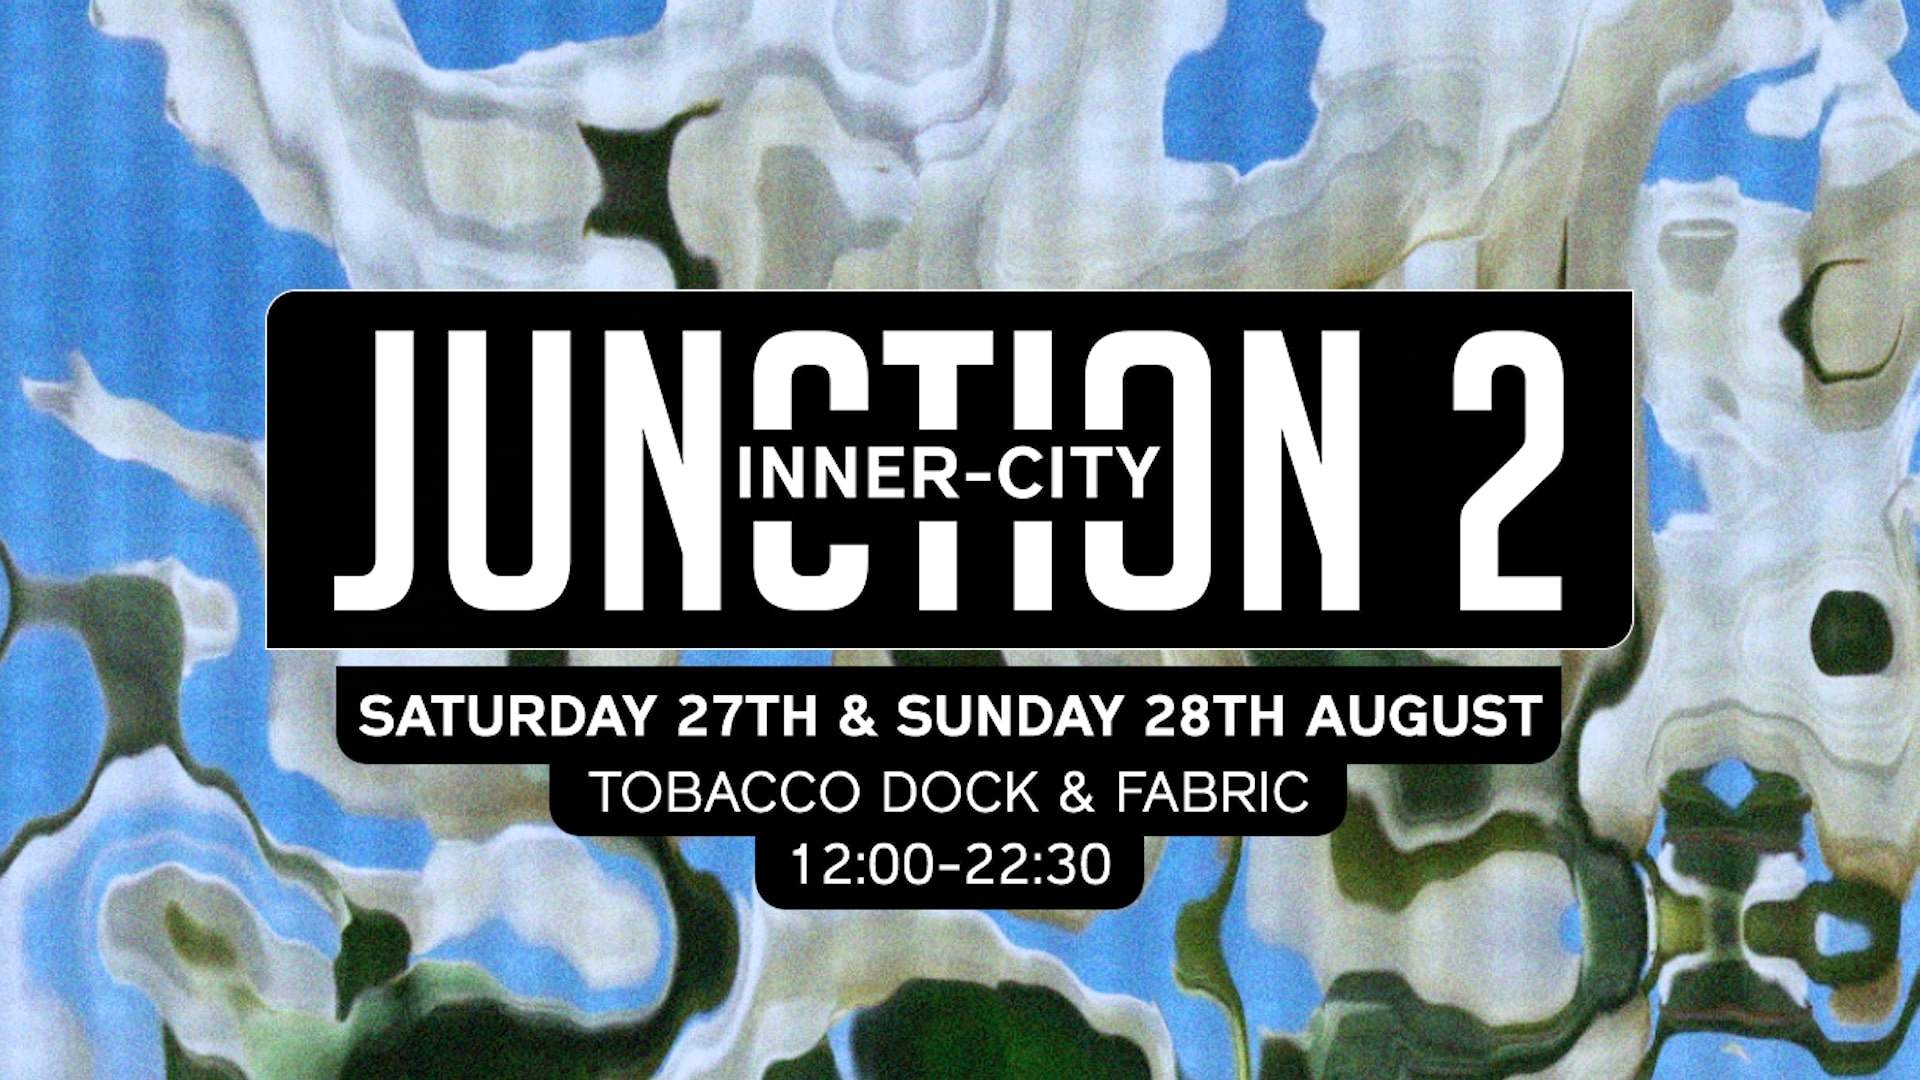 Junction 2 - Inner City: By Day (Saturday) - Página frontal